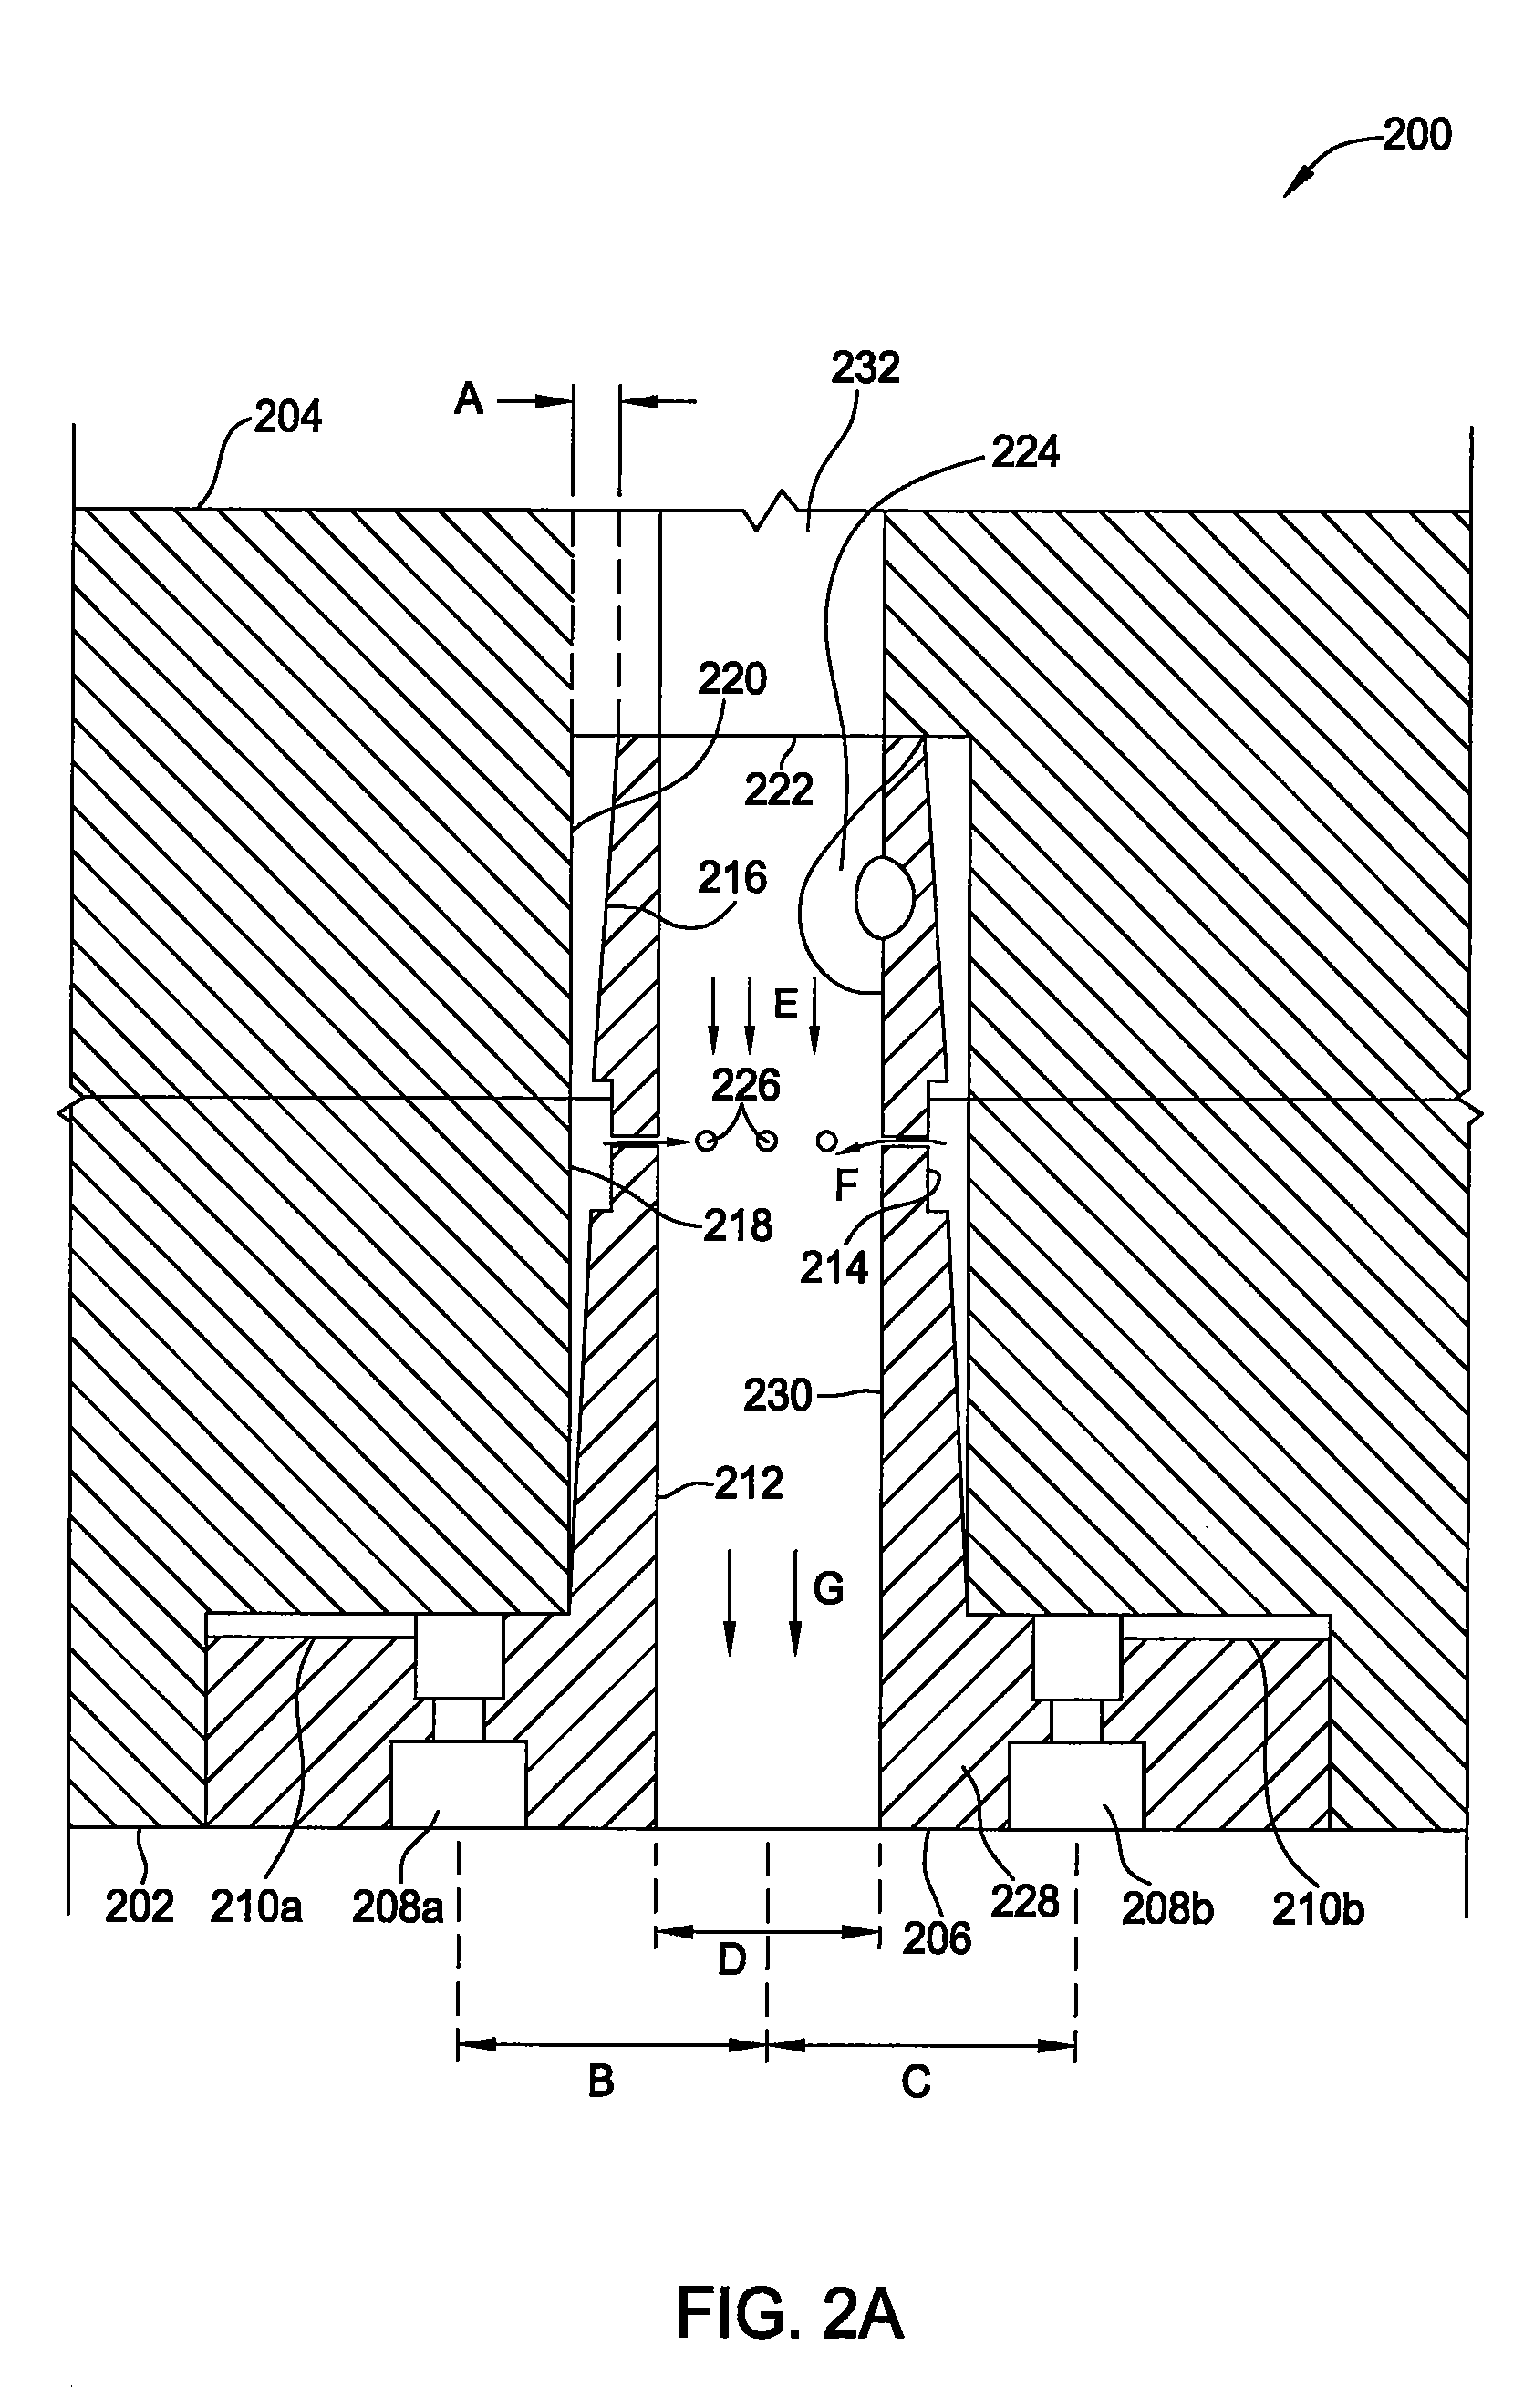 Process for tungsten nitride deposition by a temperature controlled lid assembly